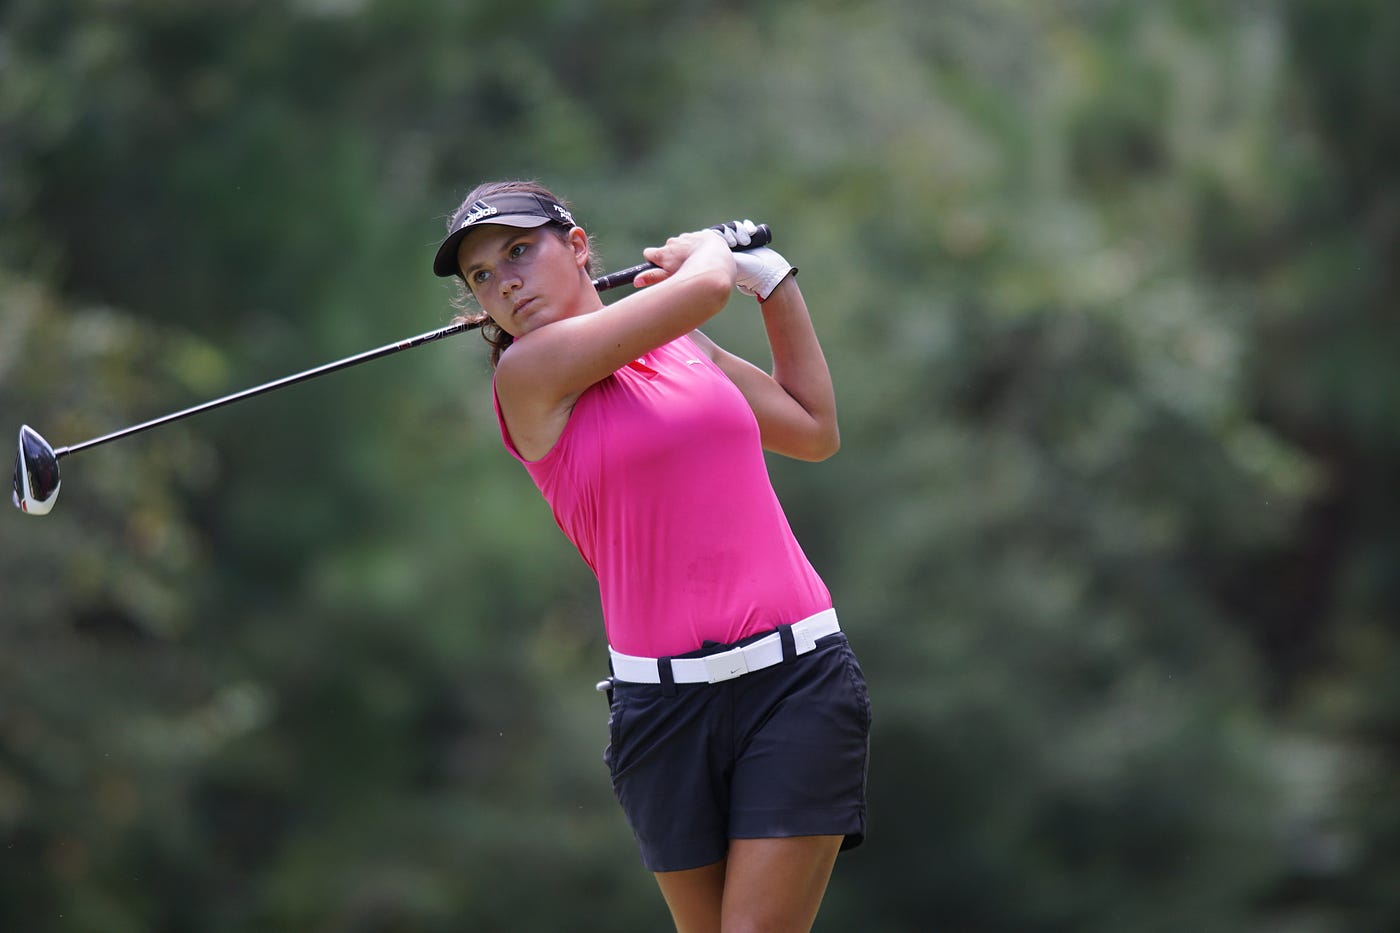 Womens Golf Apparel For Comfort And Functionality